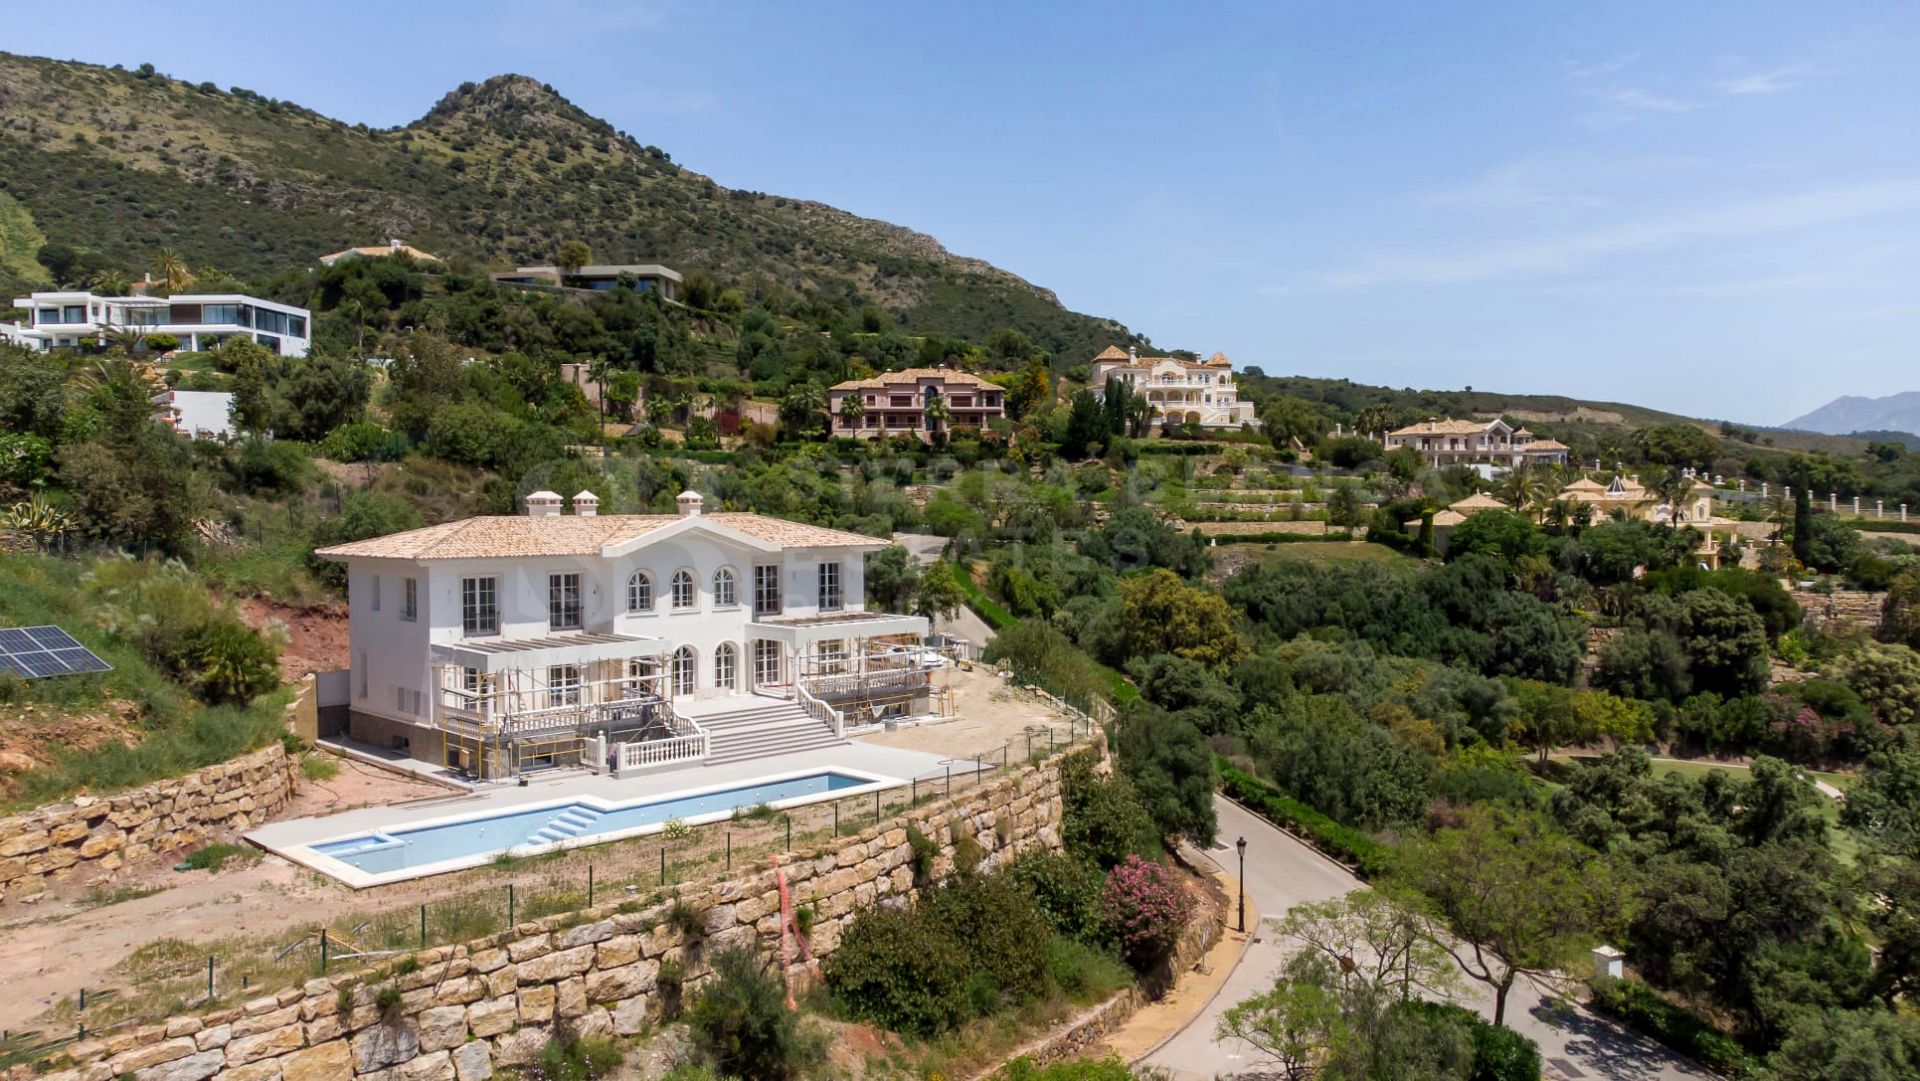 Villa in an exclusive location close to golf course